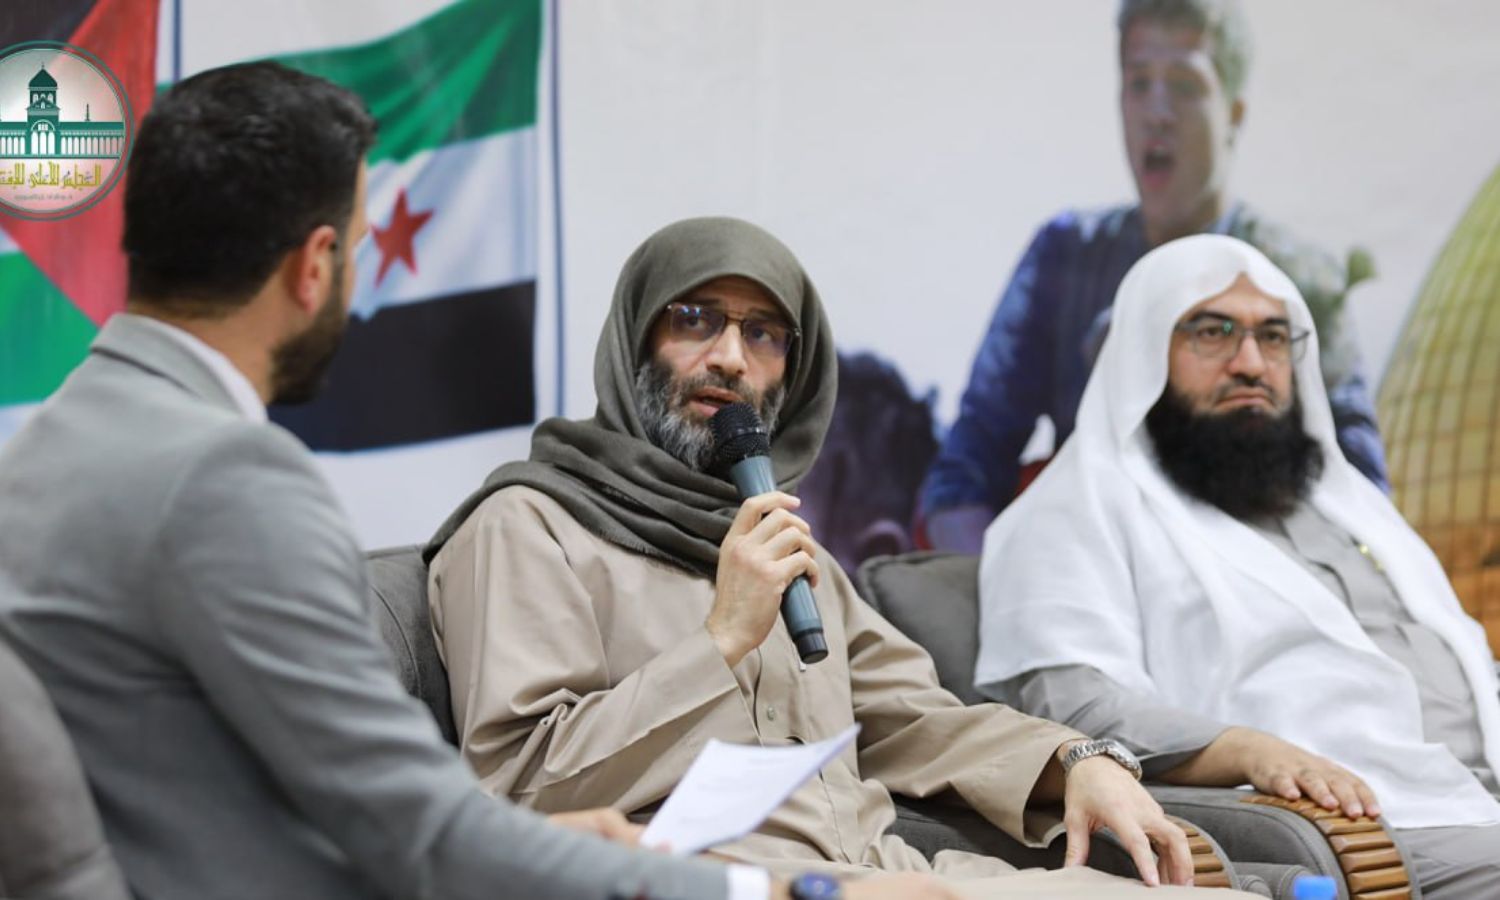 In the center, the head of the Fatwa Council of Hayat Tahrir al-Sham, which holds military control in Idlib, Abd al-Rahim Atoun - October 22, 2023 (HTS’ Fatwa Council)